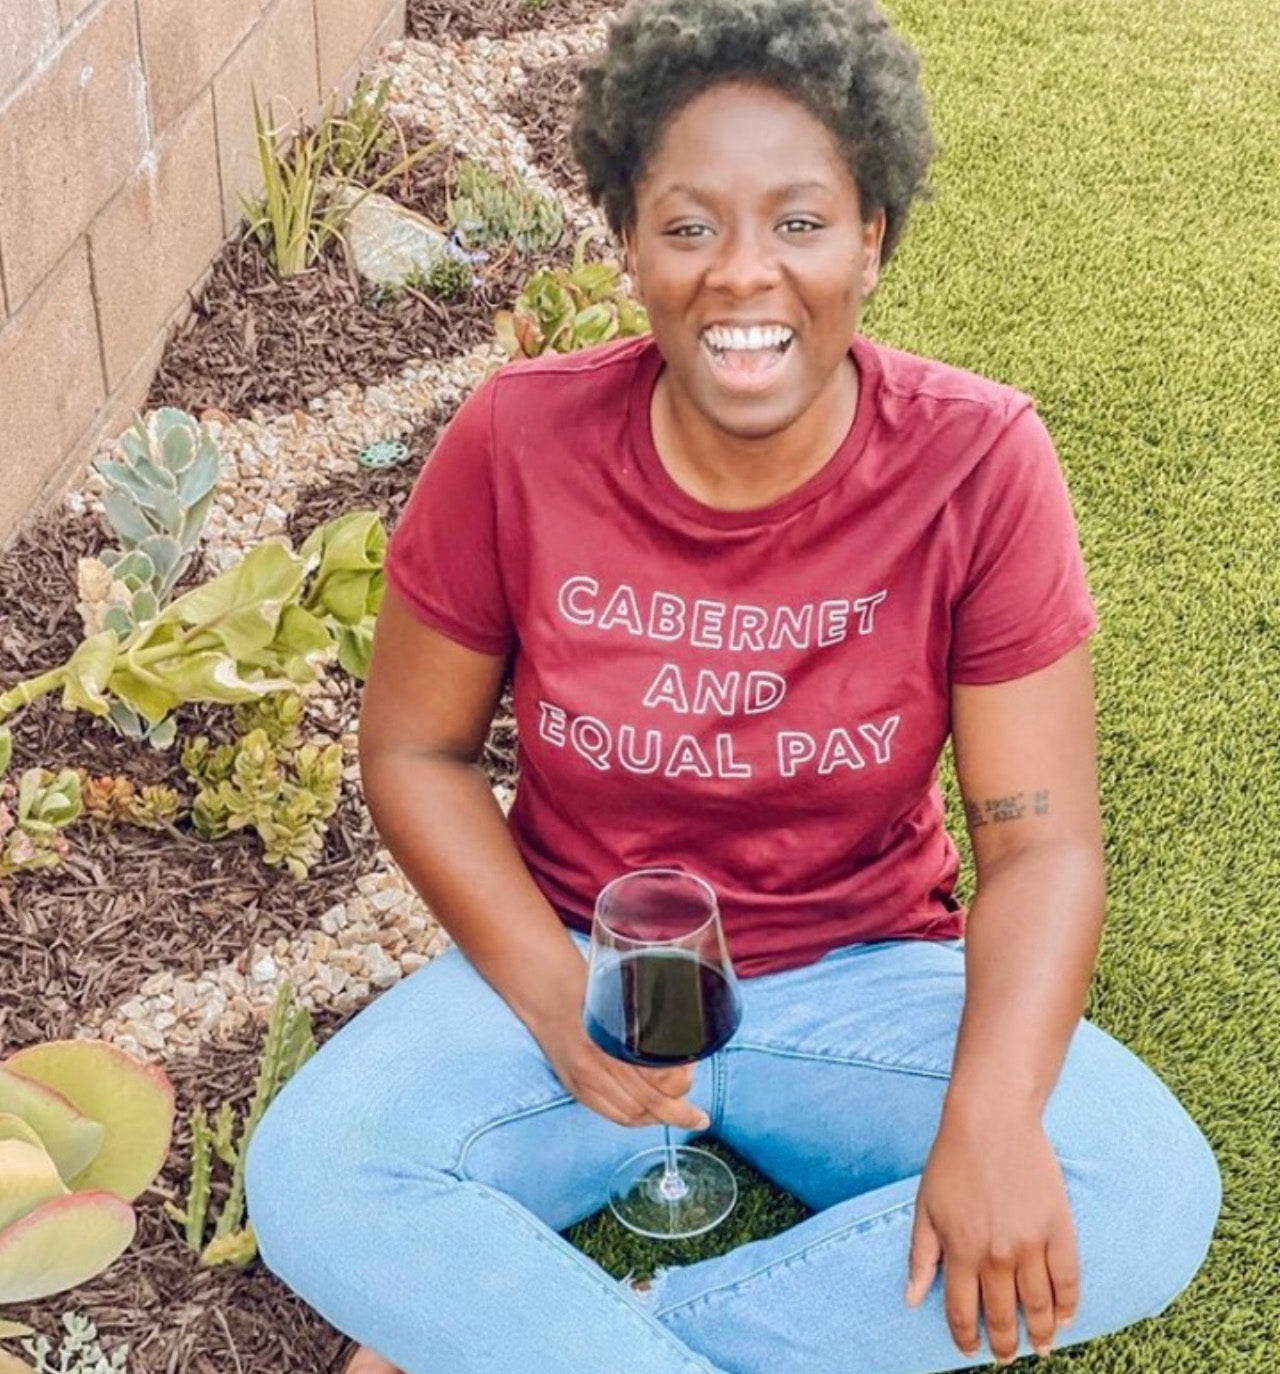 A woman sitting in the grass with a red shirt that says "Cabernet and Equal Pay" and a glass of wine